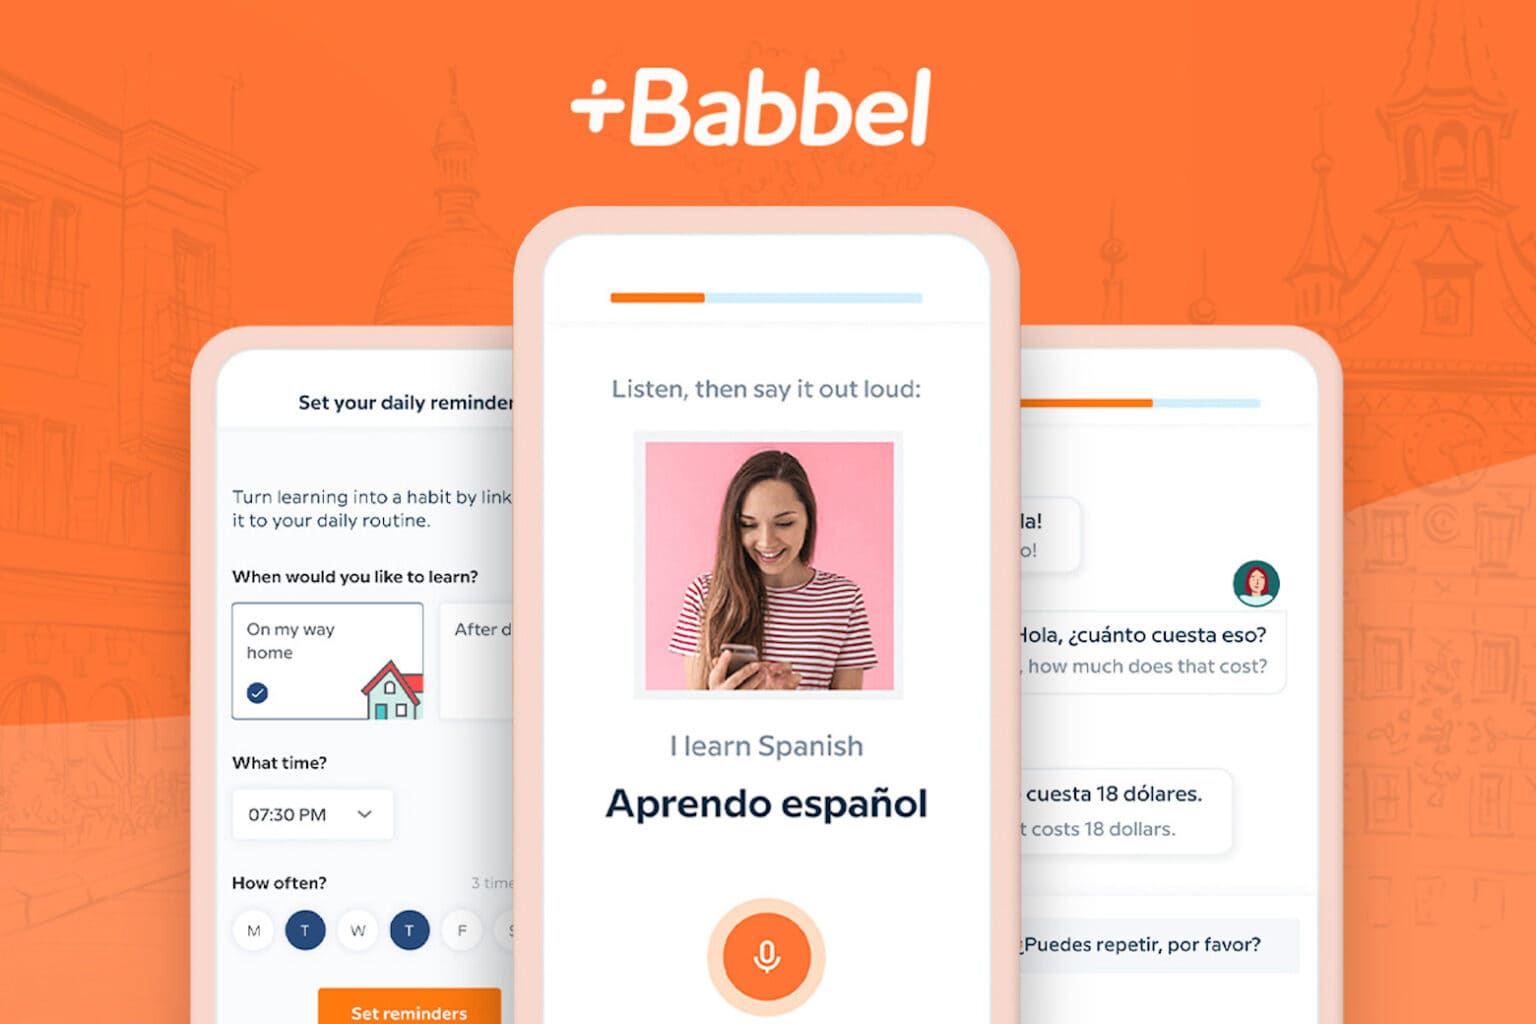 Get a lifetime of language learning with this best price on Babbel.